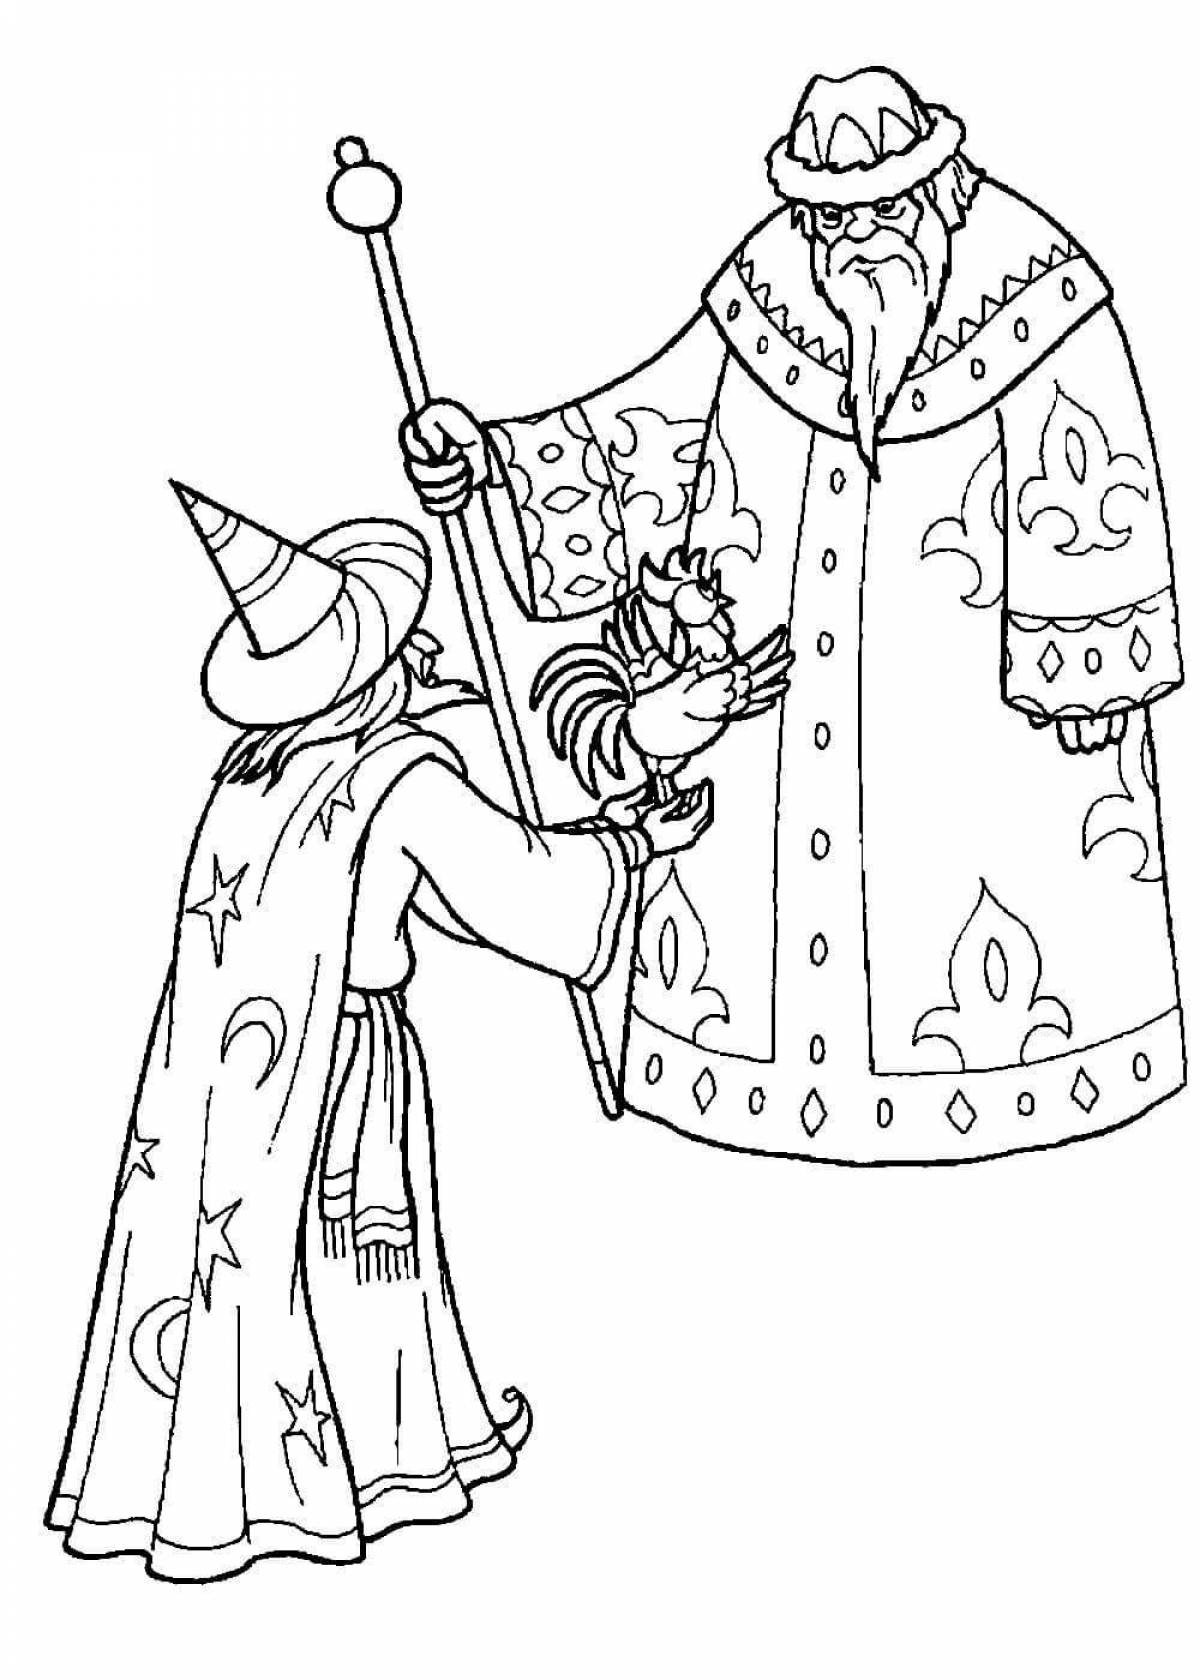 Great coloring book from Pushkin's fairy tales